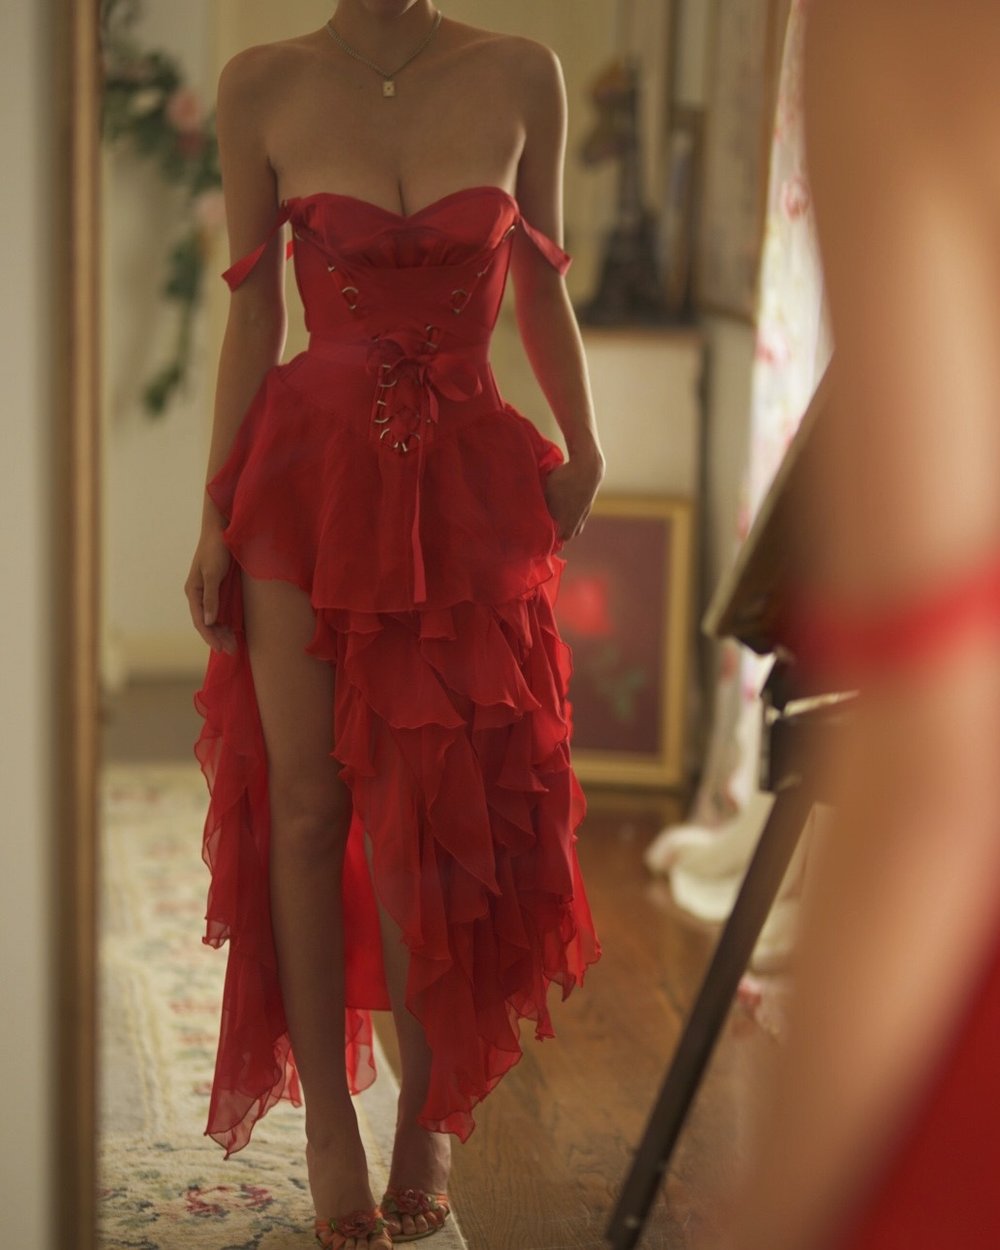 Rare Luxurious English Designer Red Ruffled Lace-Up Corset Bustier Dress  (S-M) — Sororité.